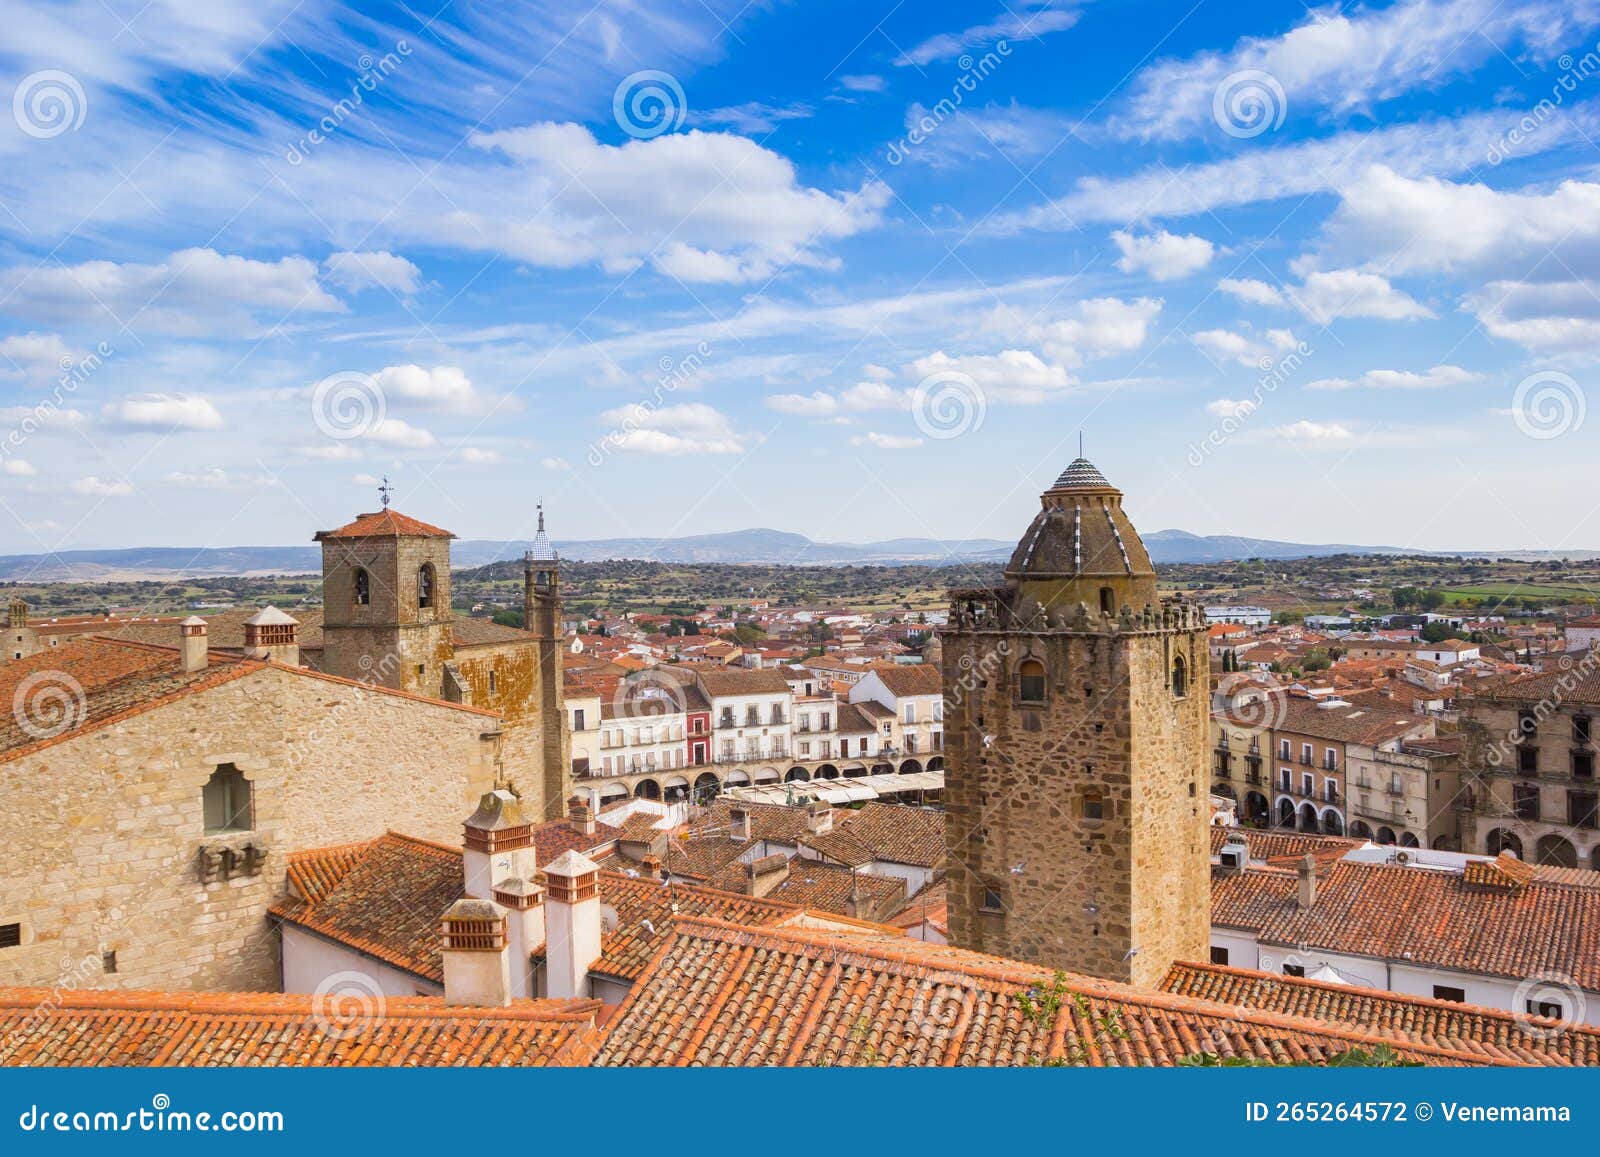 rooftops and church towers of the historic city trujillo